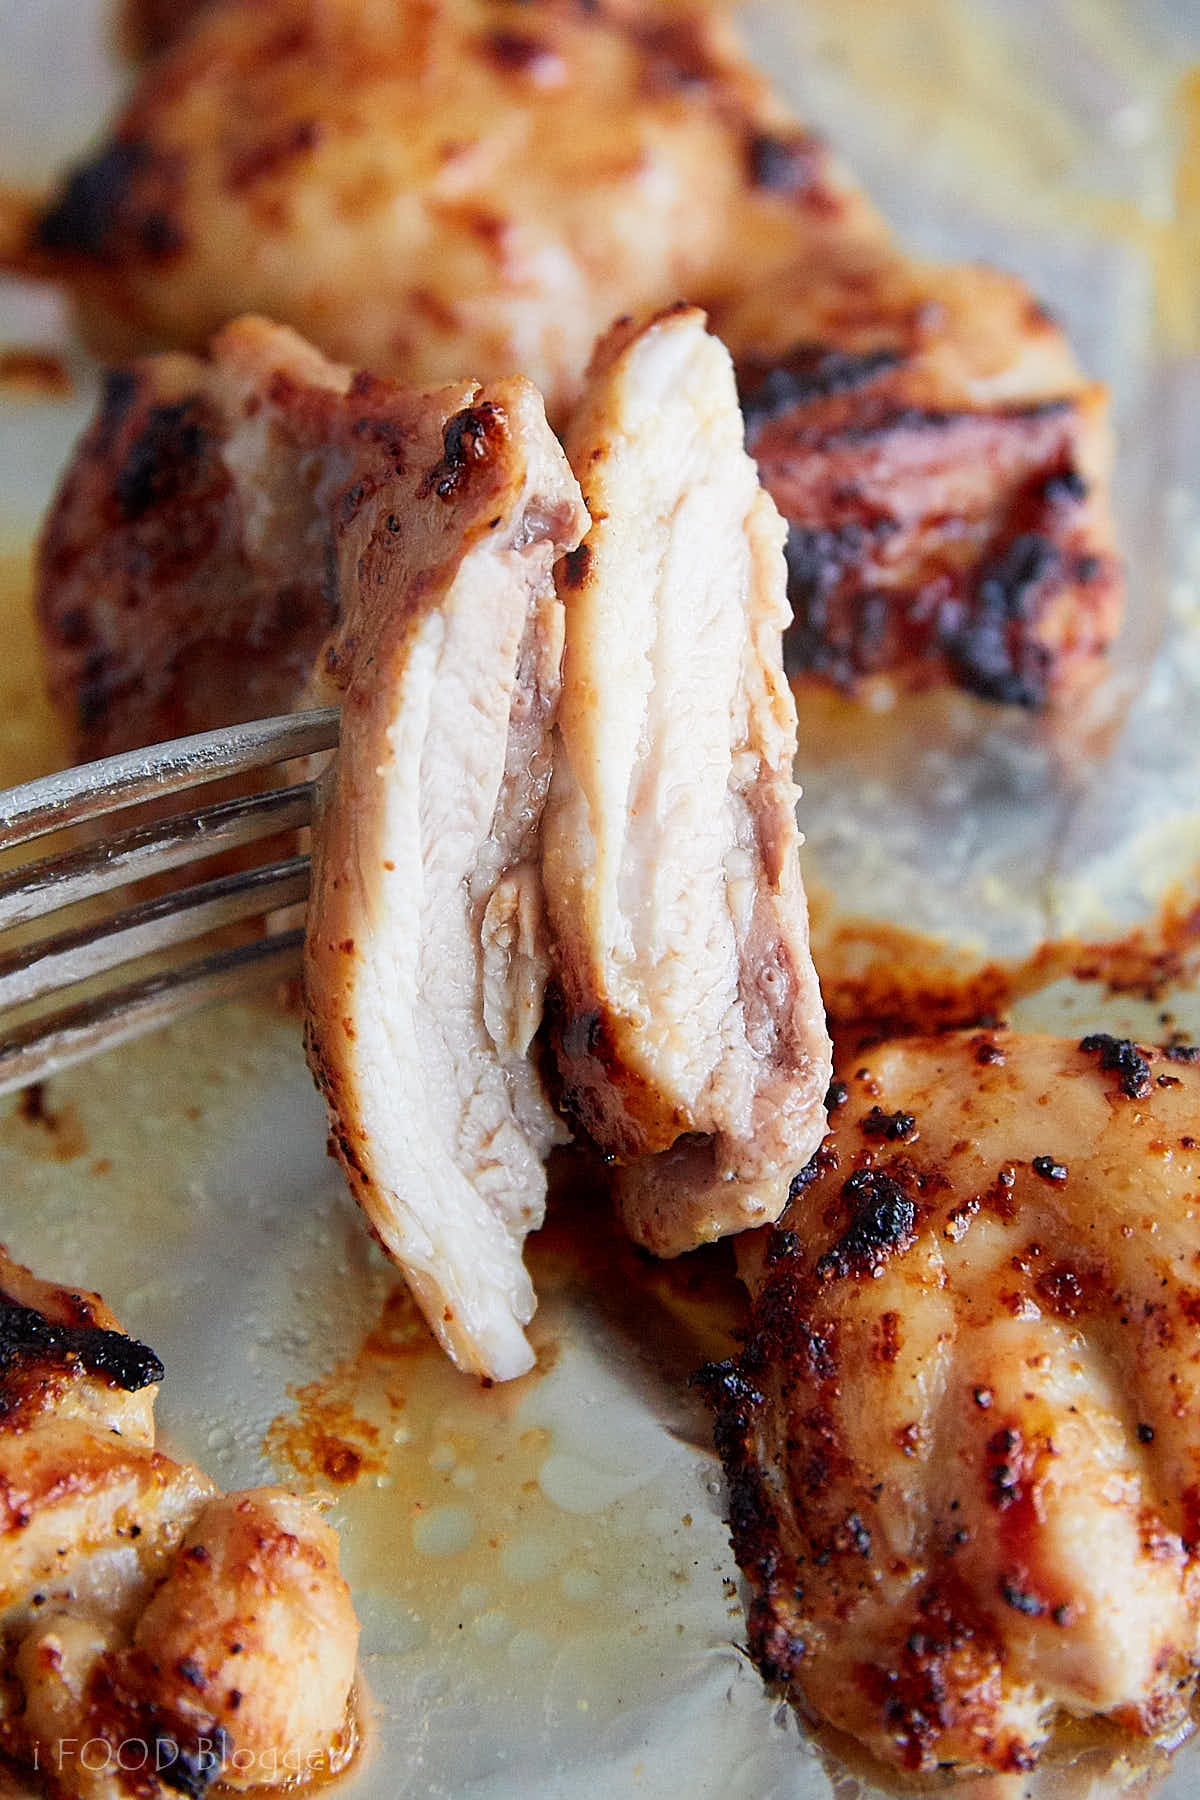 Two juicy, moist broiled chicken thigh pieces on a fork.